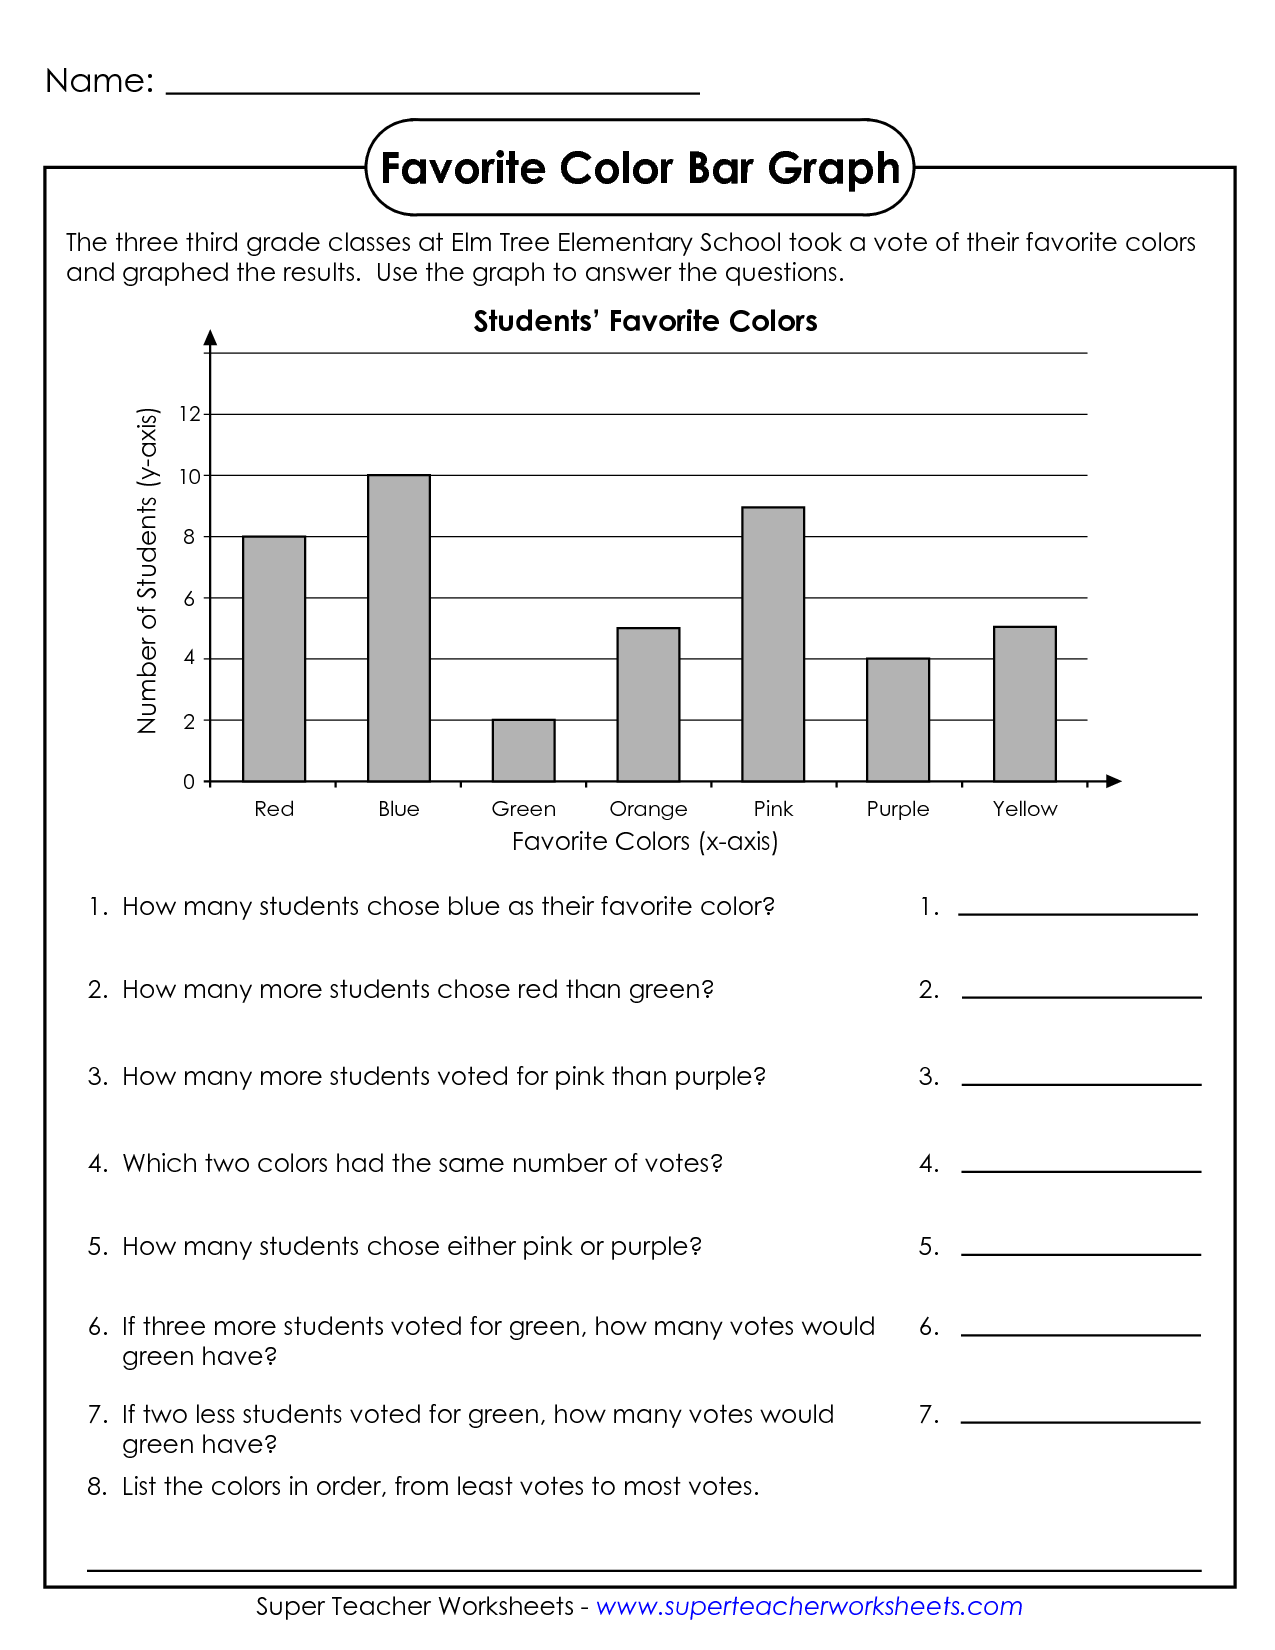 Adverb Volleyball George Super Teacher Worksheets Answers